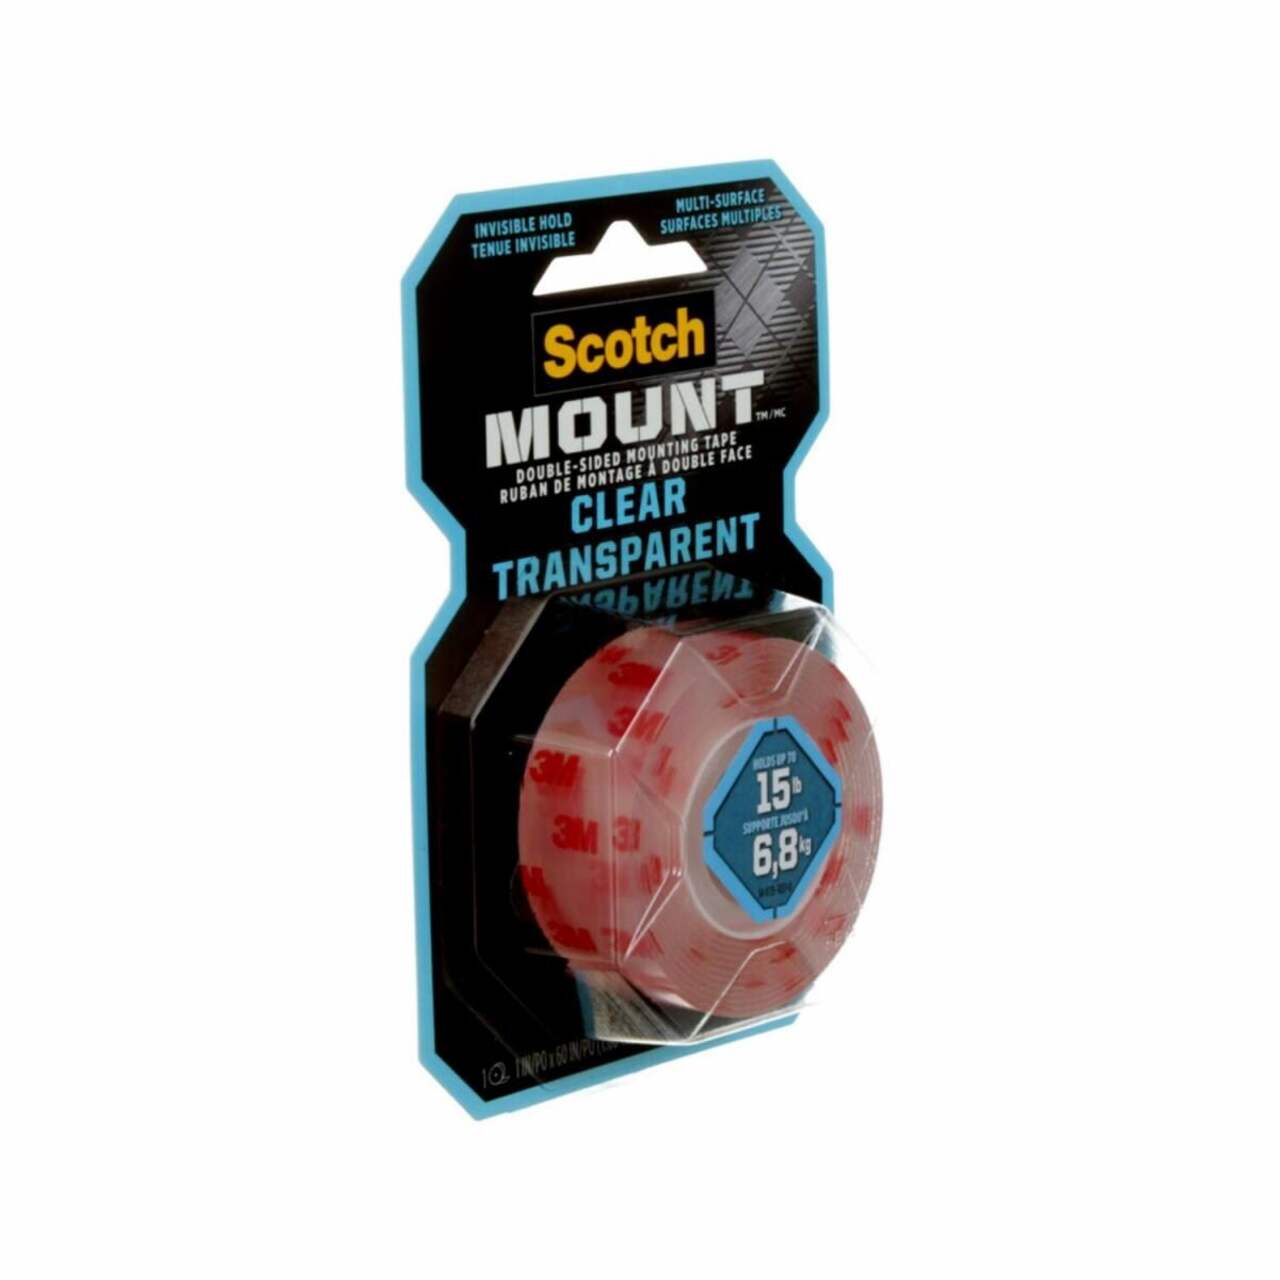 3M Scotch Mount Double Sided Mounting Tape, Holds Up To 15-lbs, Clear, 1 x  60-in